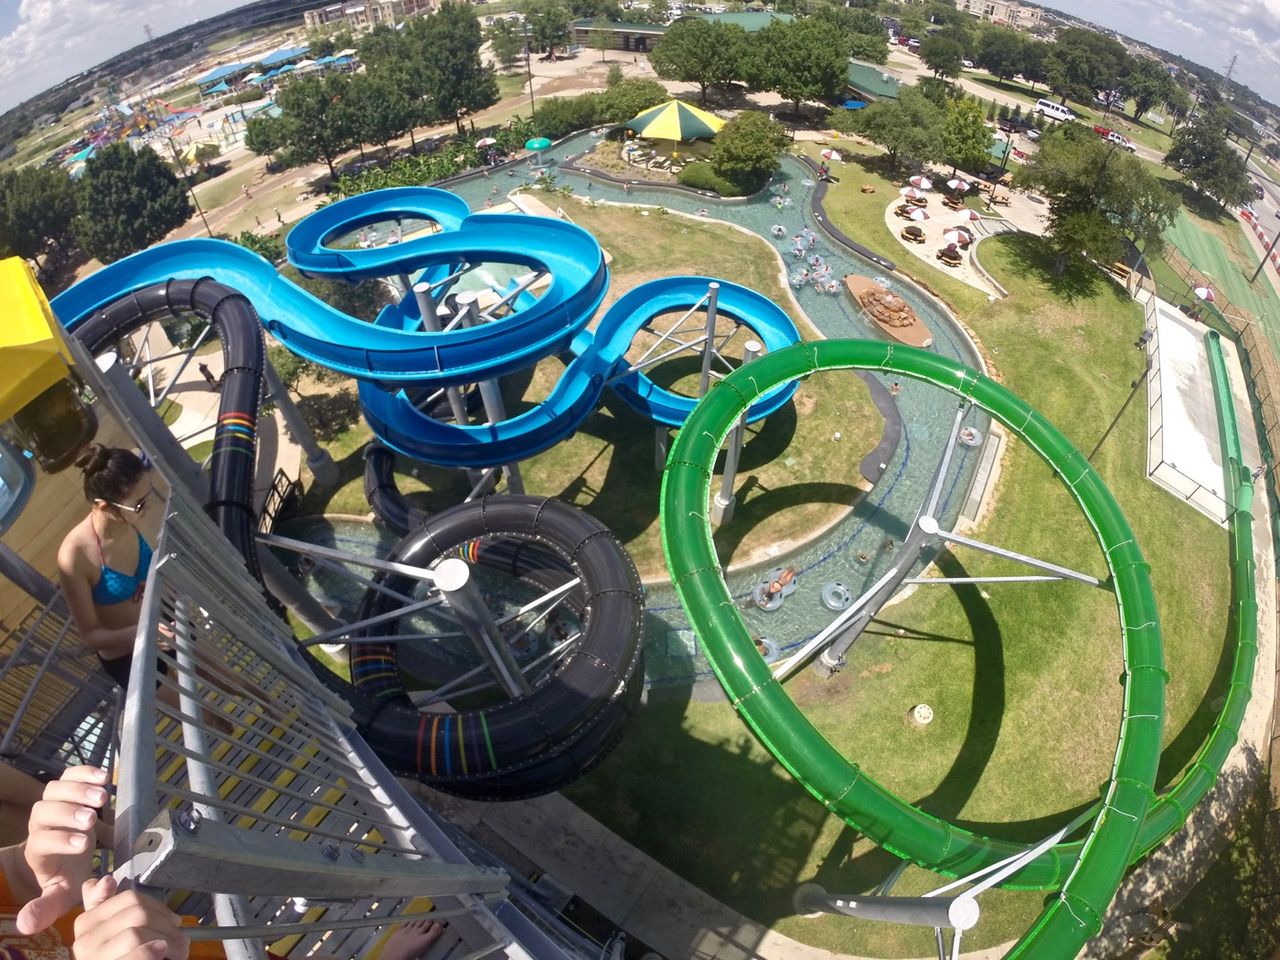 High-altiude shot of water slides.